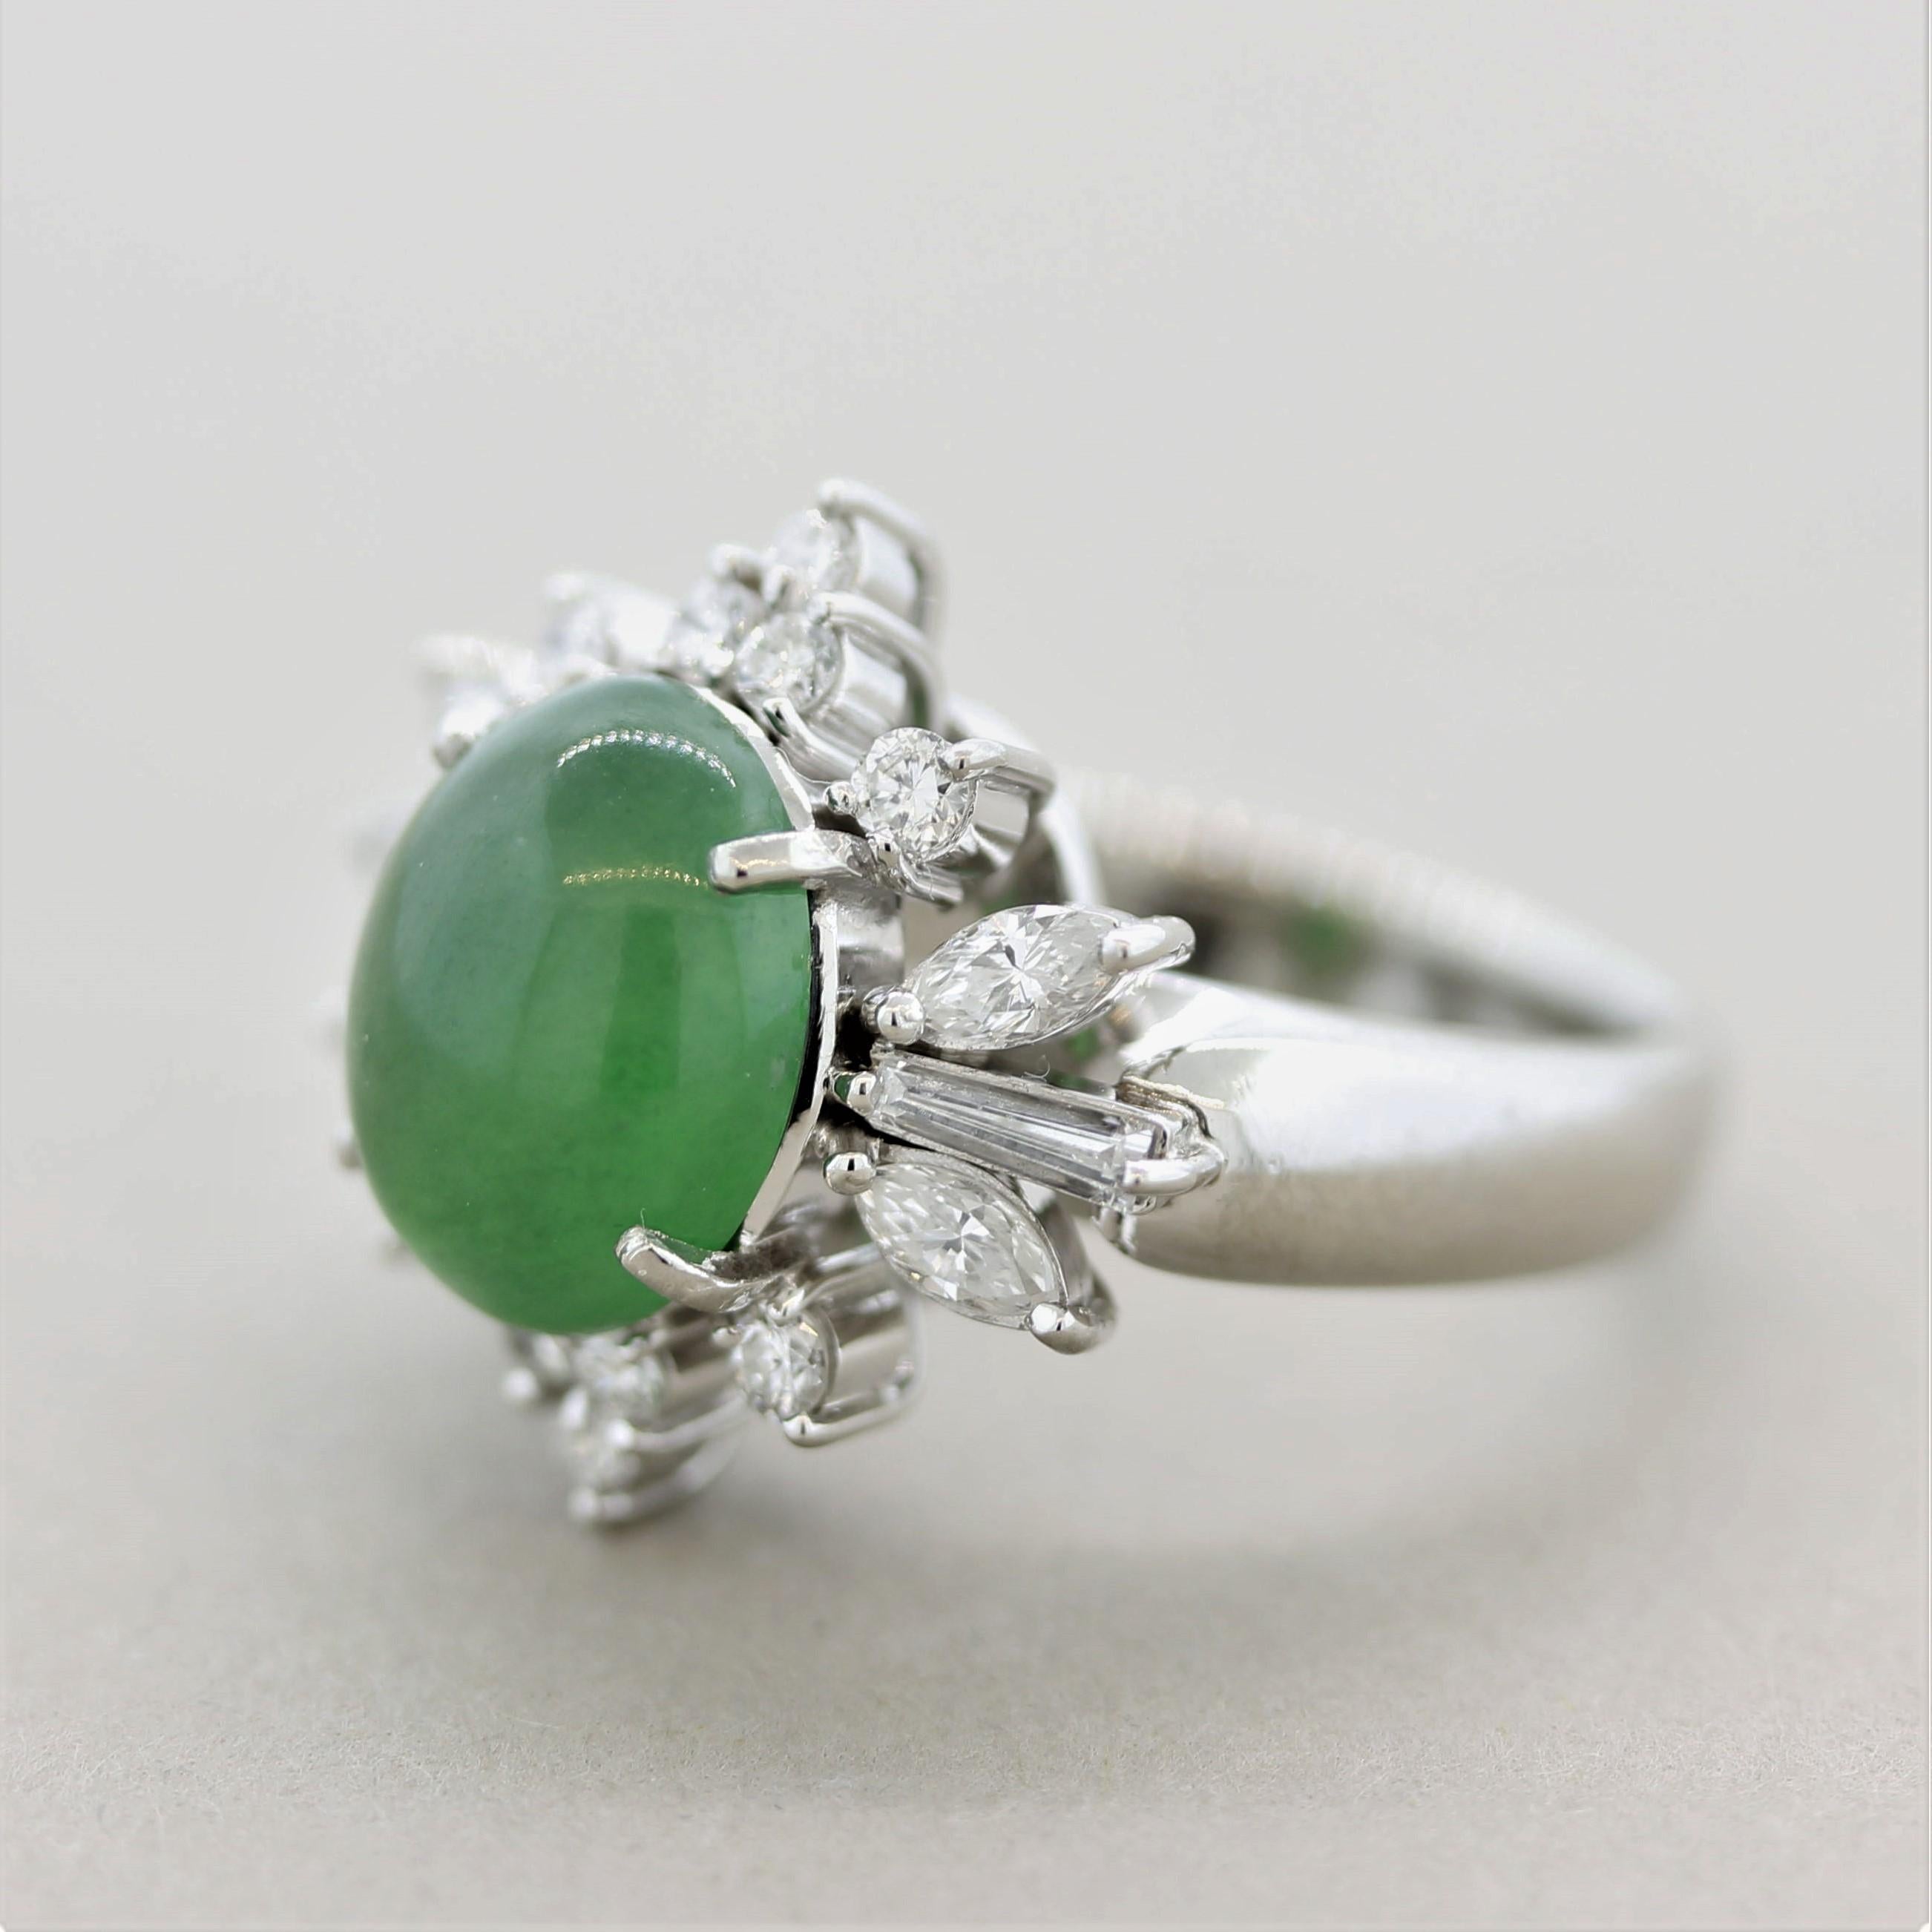 Mixed Cut Natural Jadeite Jade Diamond Platinum Floral Ring, GIA Certified For Sale